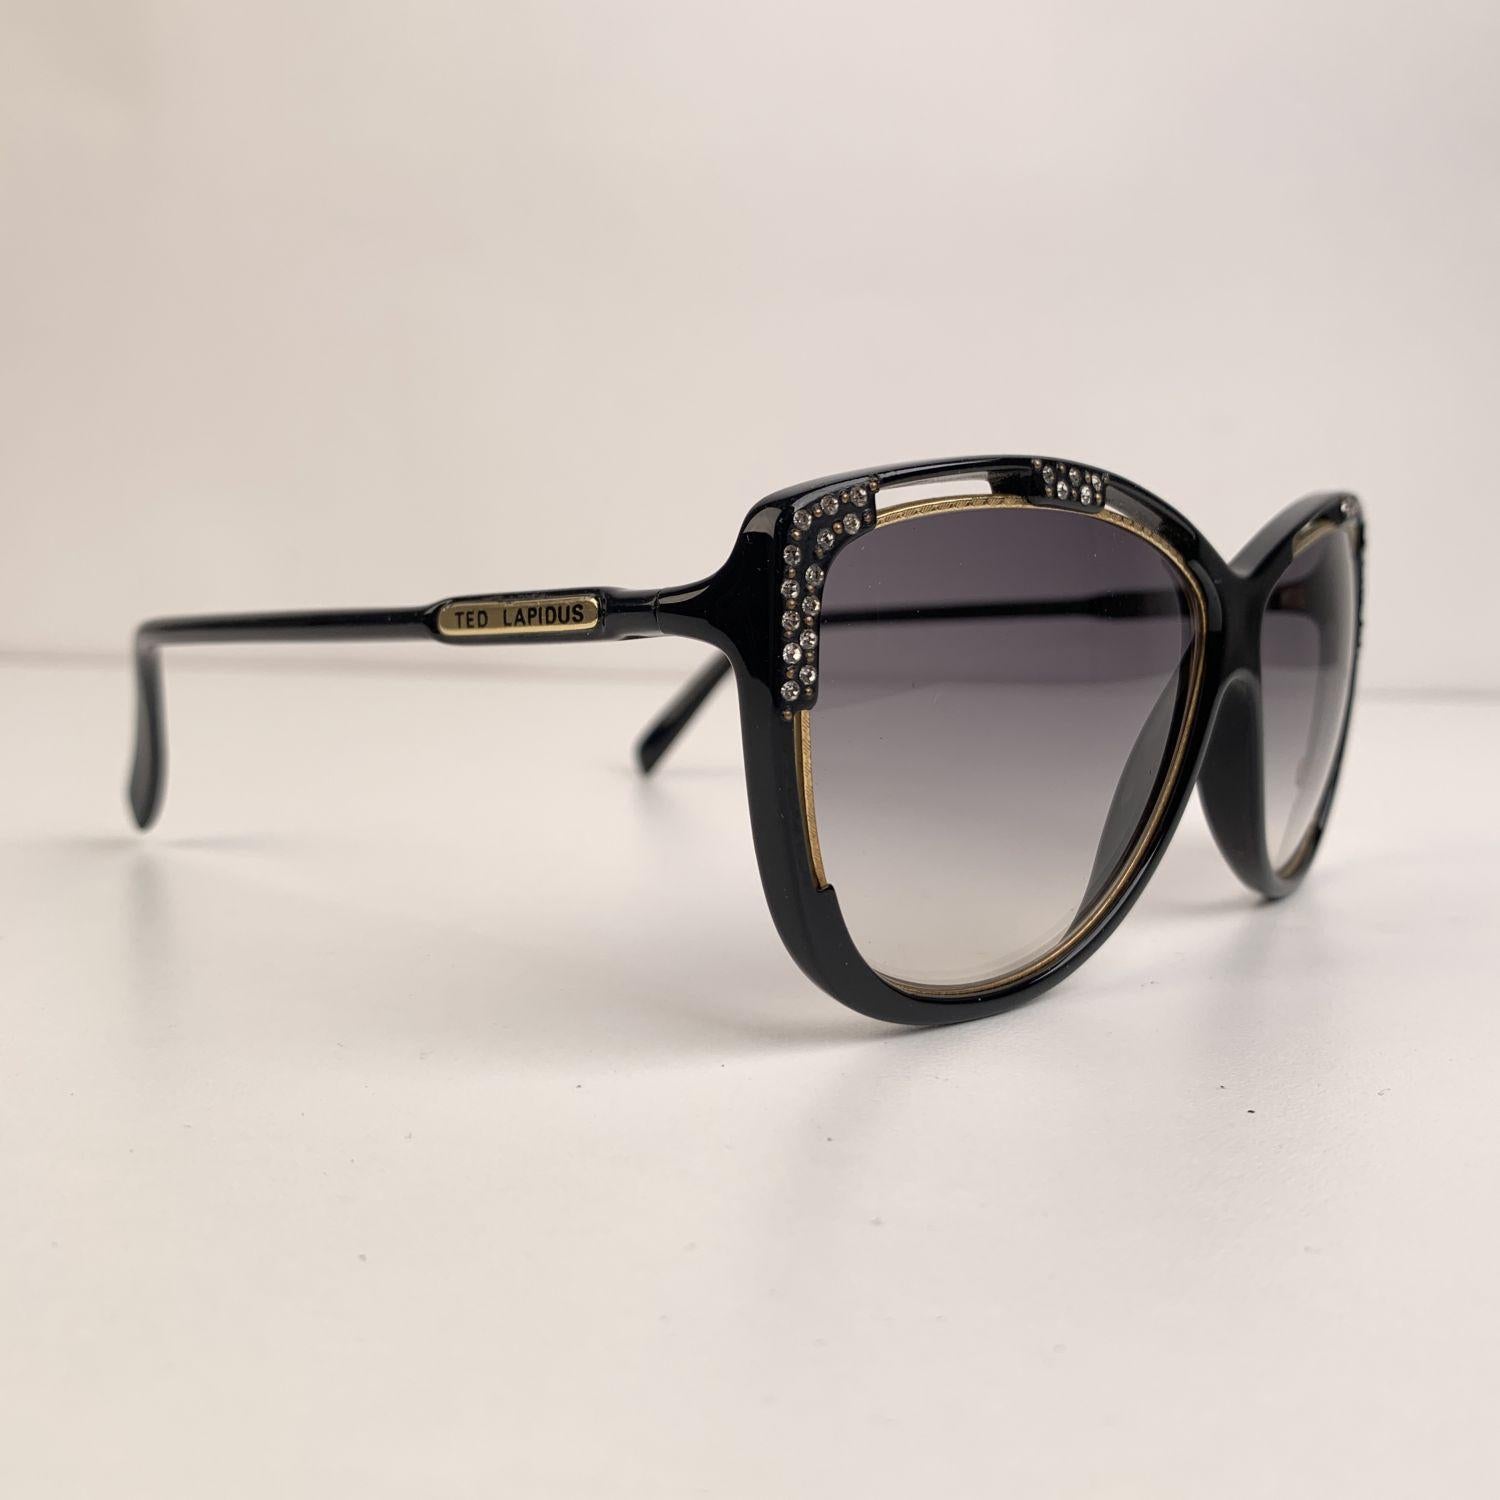 Women's Ted Lapidus Vintage TL 17 01 Sunglasses Crystals 62-16 130mm